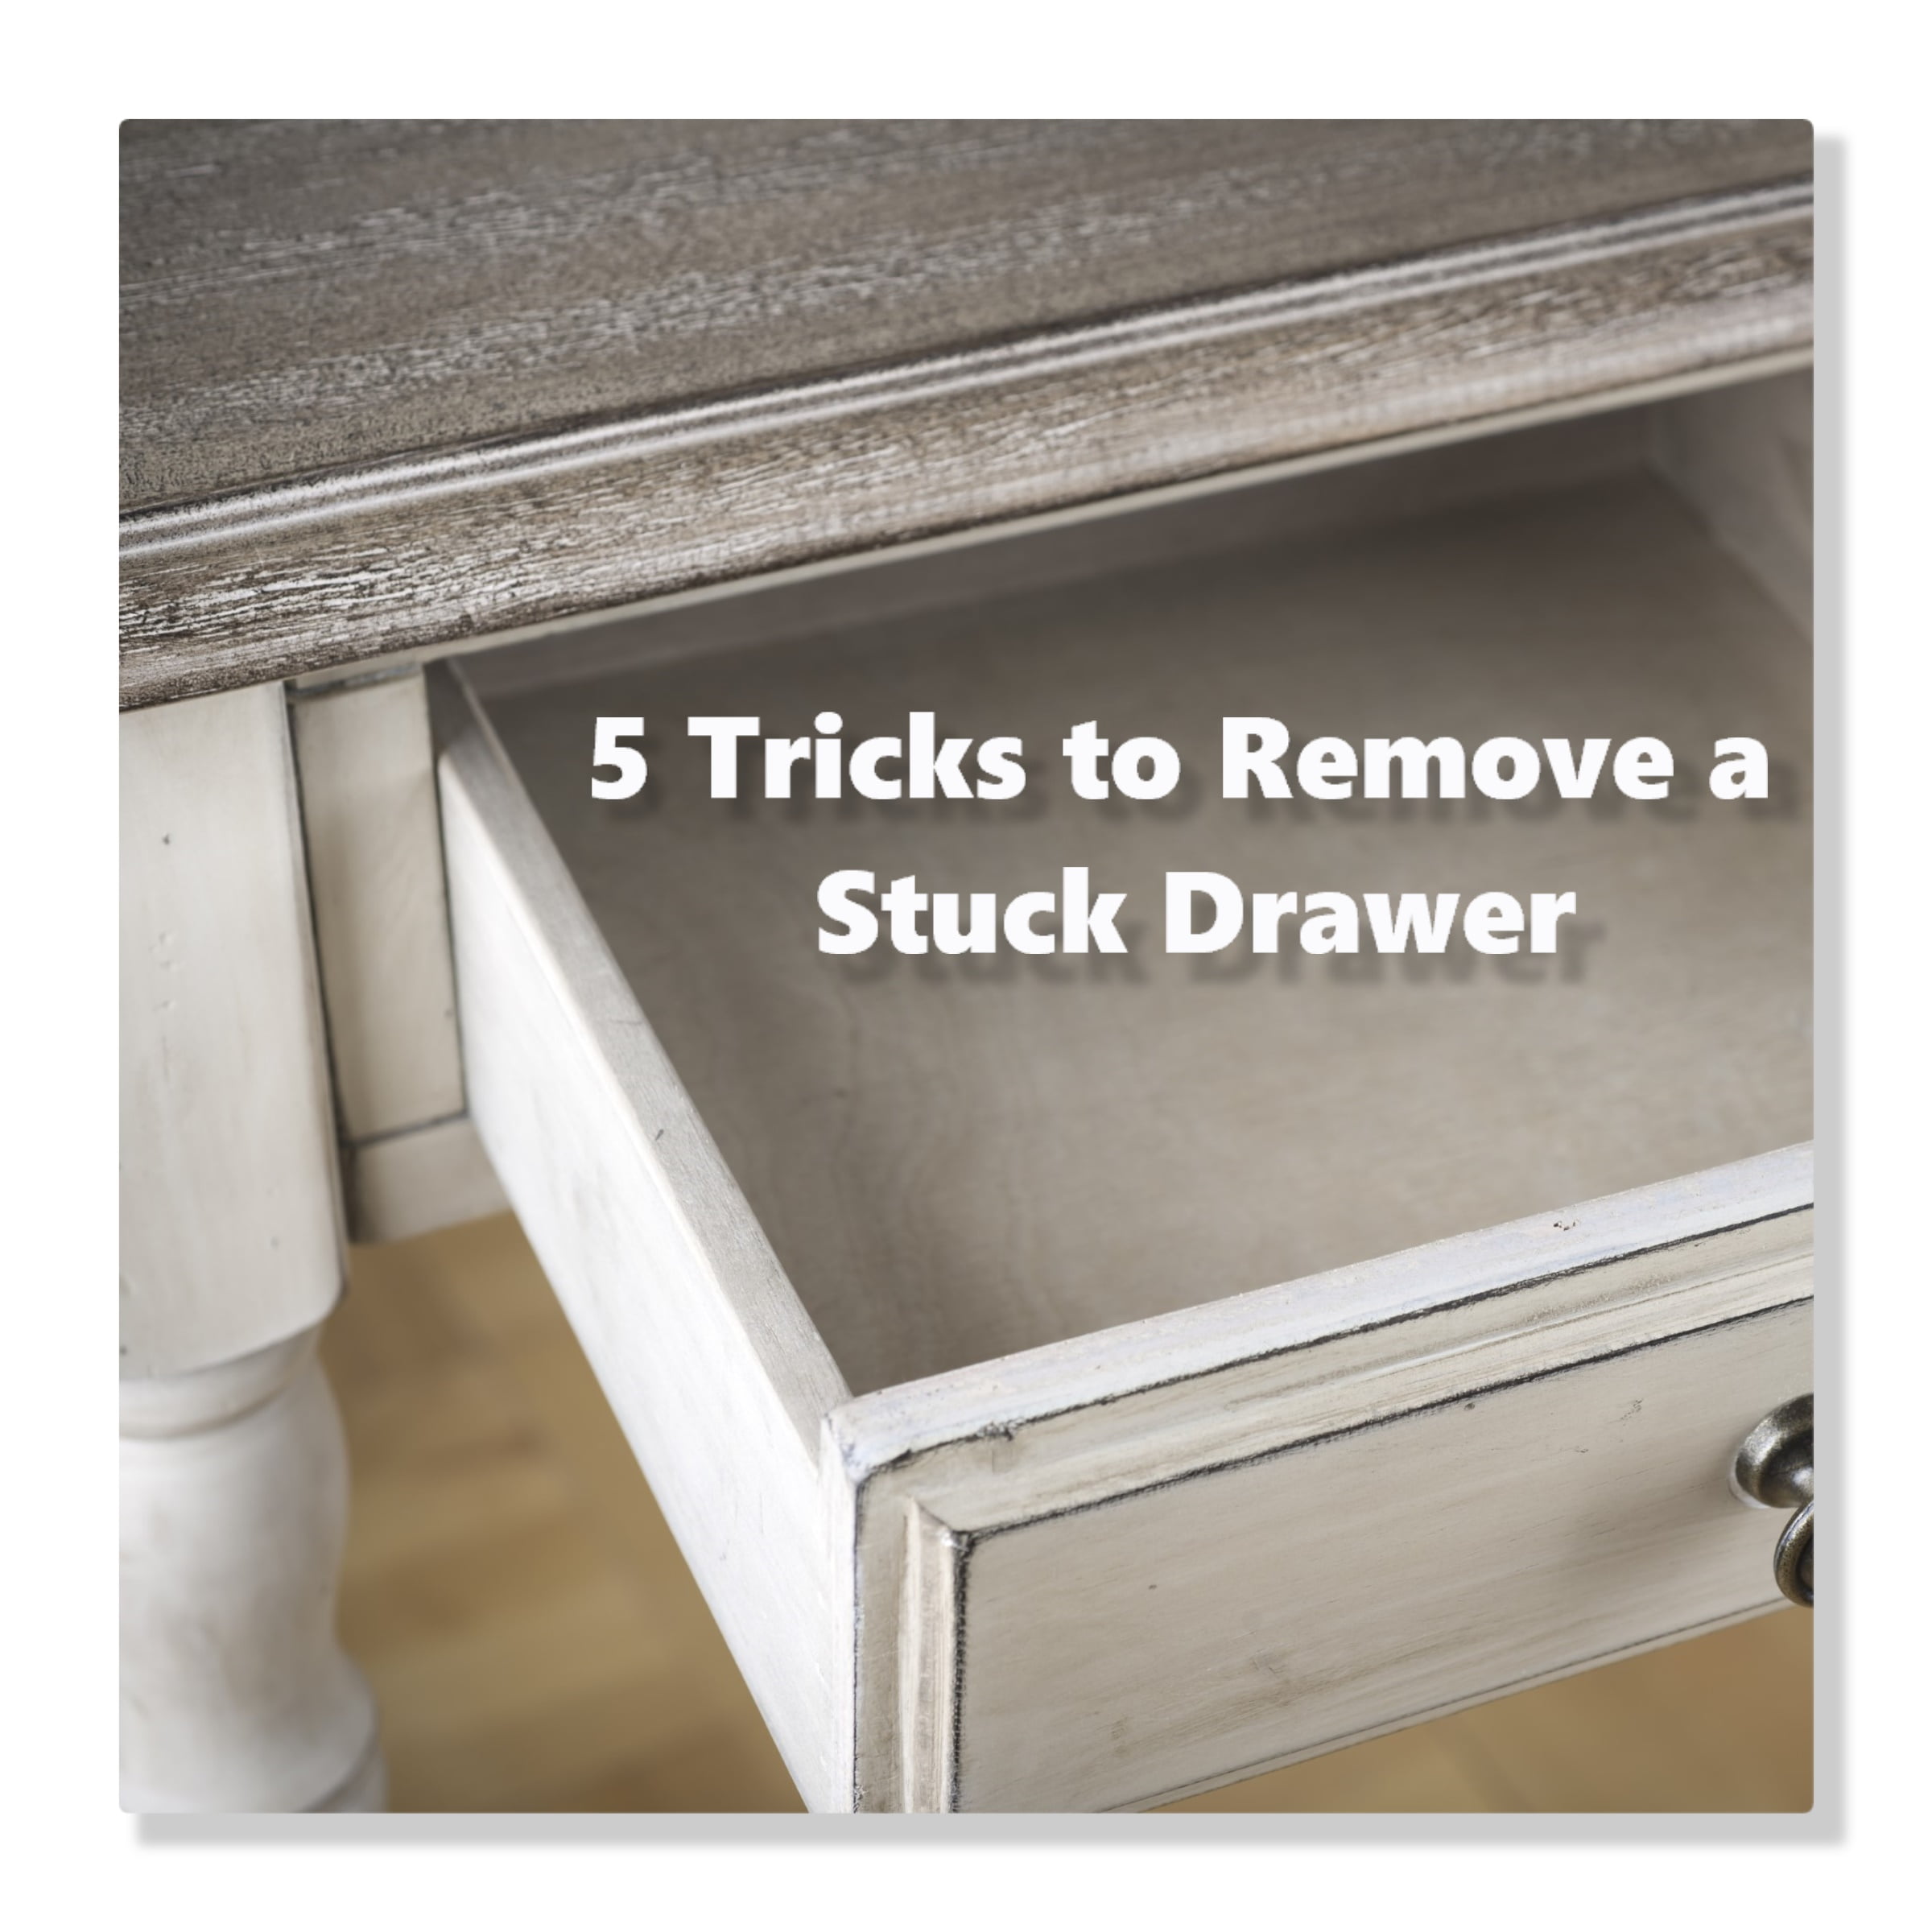 How to remove dresser drawer with center metal slide